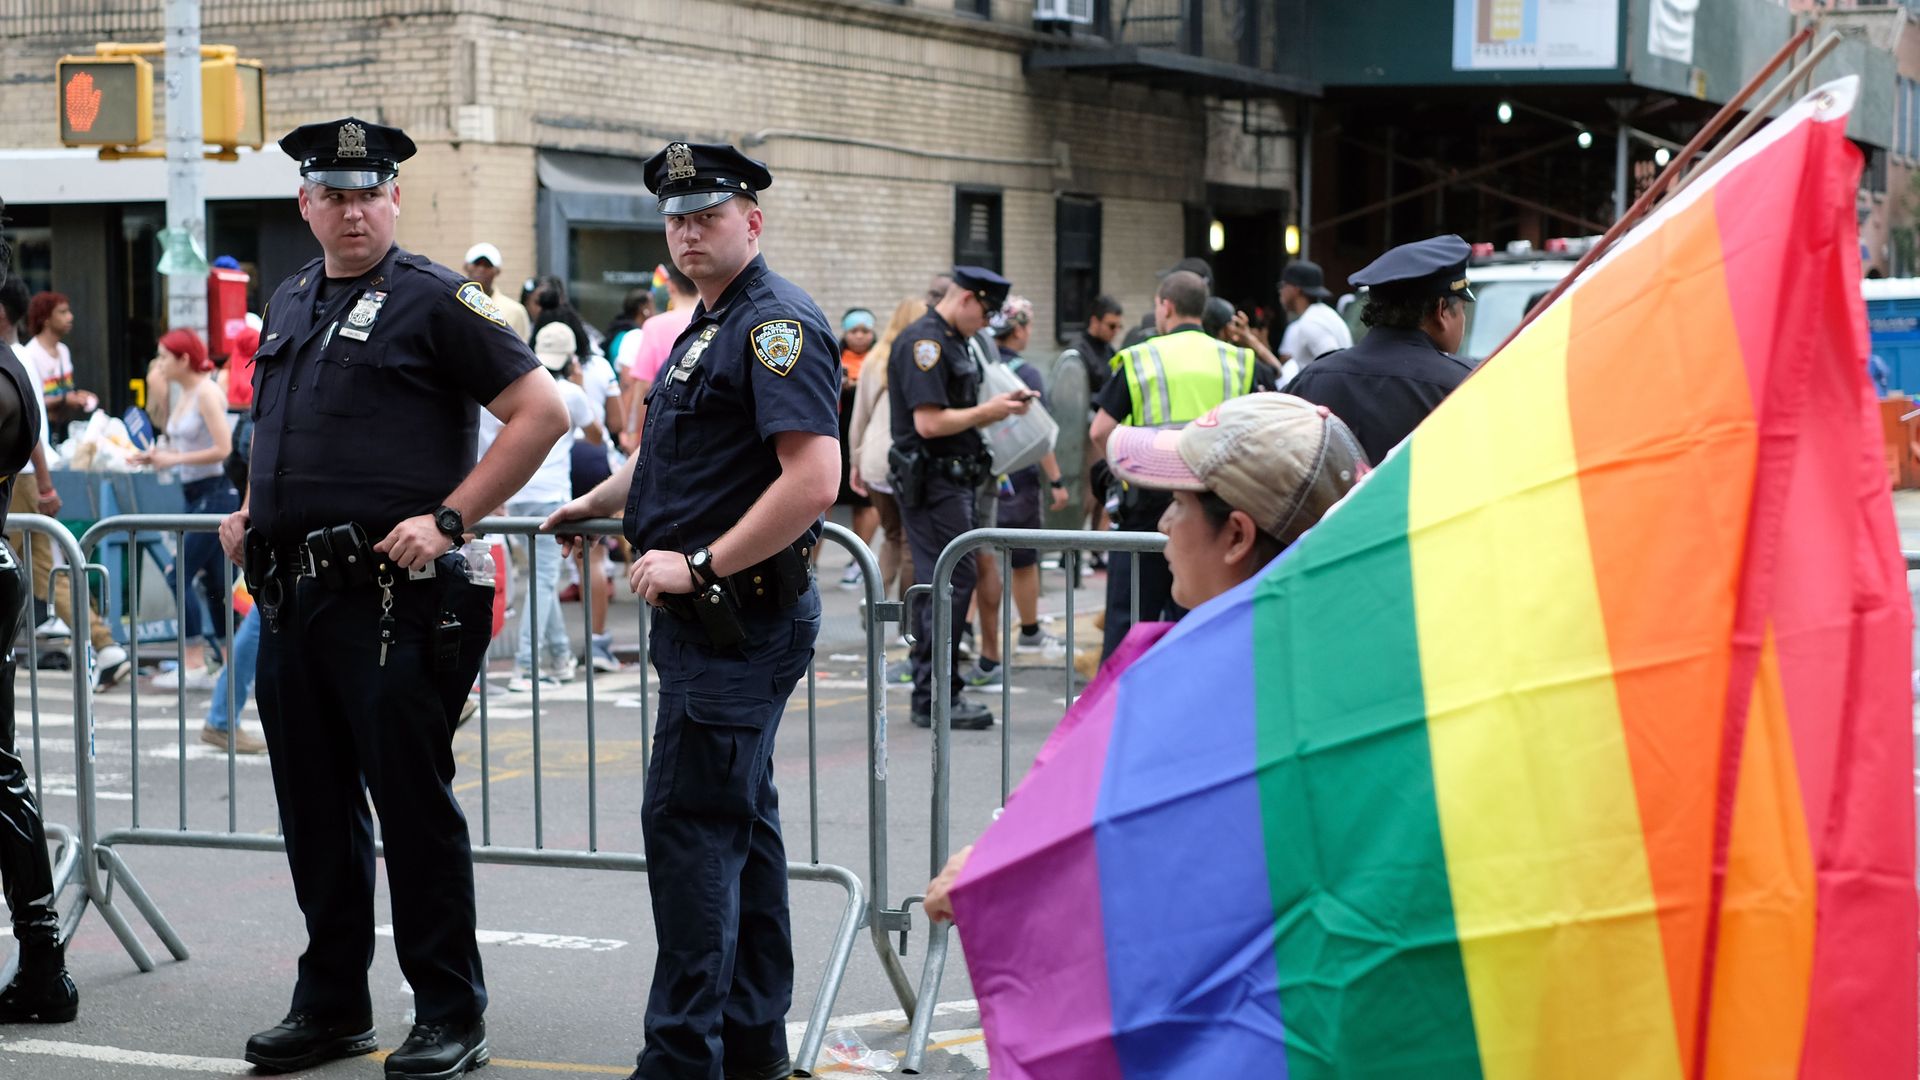 Picture of police working as security for pride parade in new york